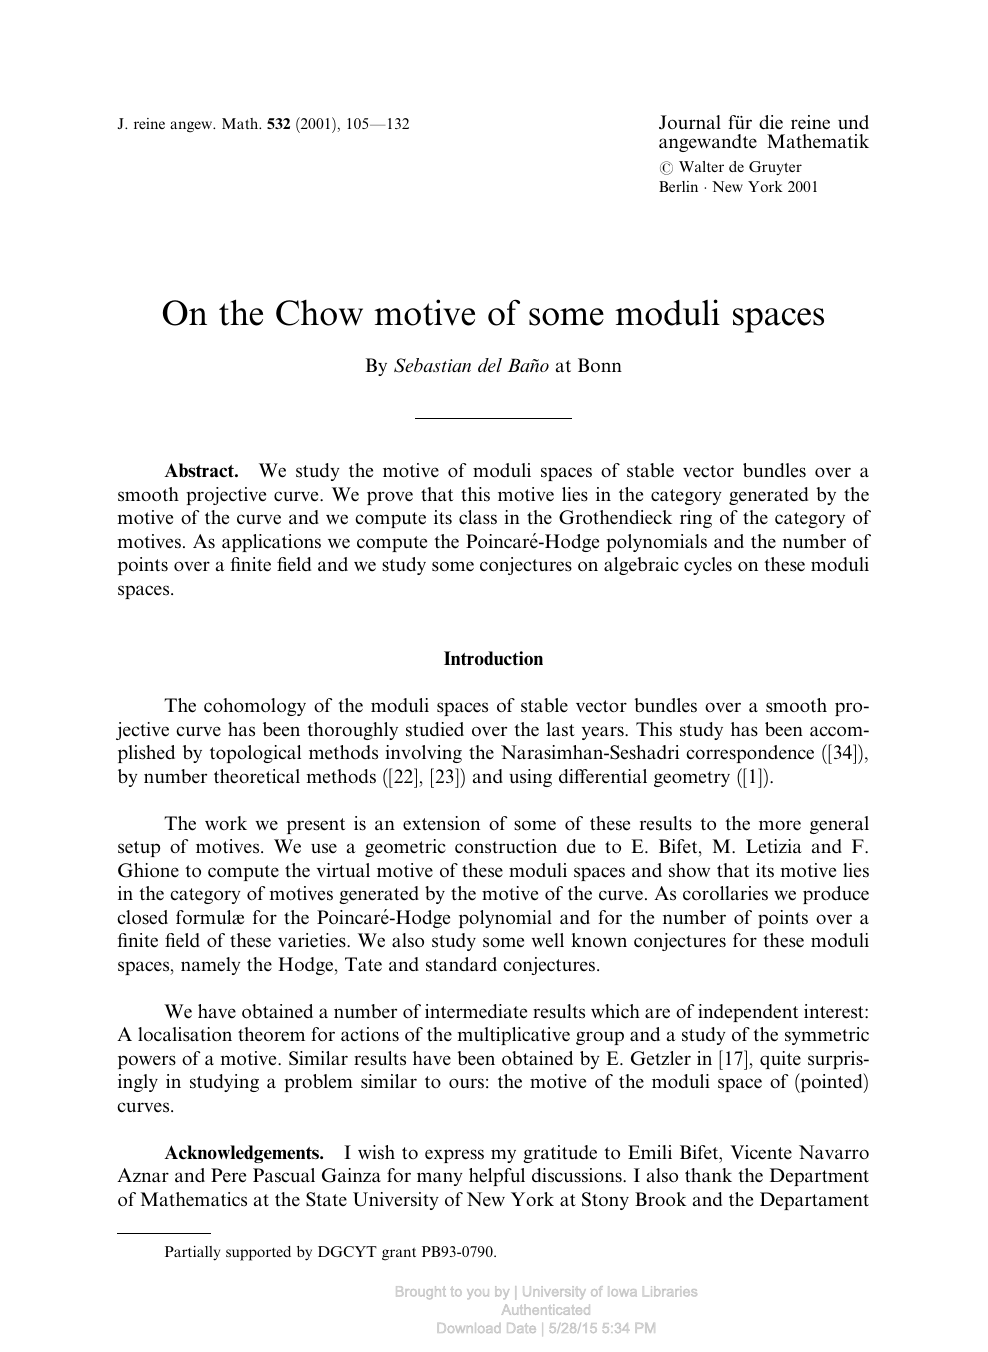 On The Chow Motive Of Some Moduli Spaces Topic Of Research Paper In Mathematics Download Scholarly Article Pdf And Read For Free On Cyberleninka Open Science Hub